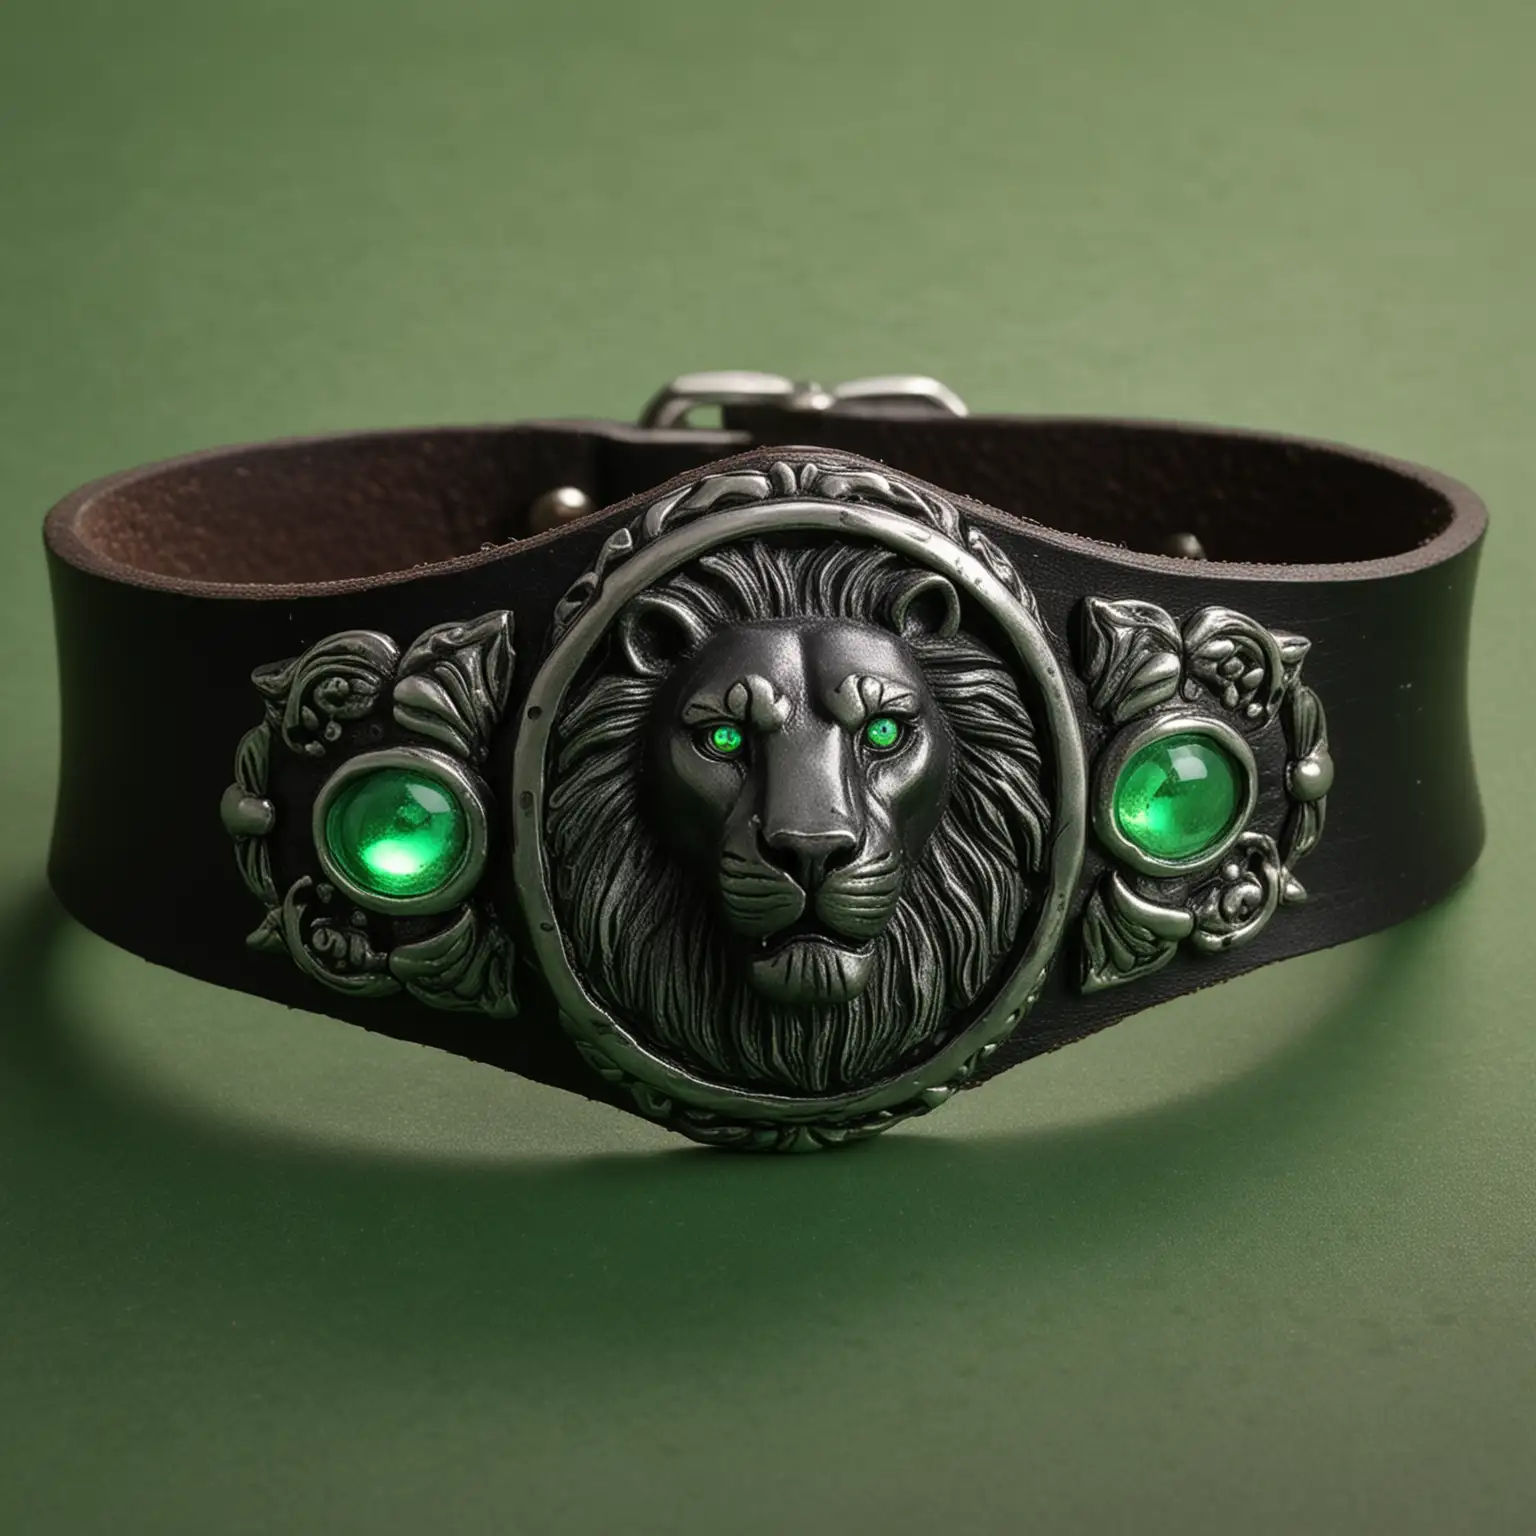 make a black leather wrist band with an oval shaped stone in the center, the oval shaped stone has a green glow in the background with the face of a lion in the center